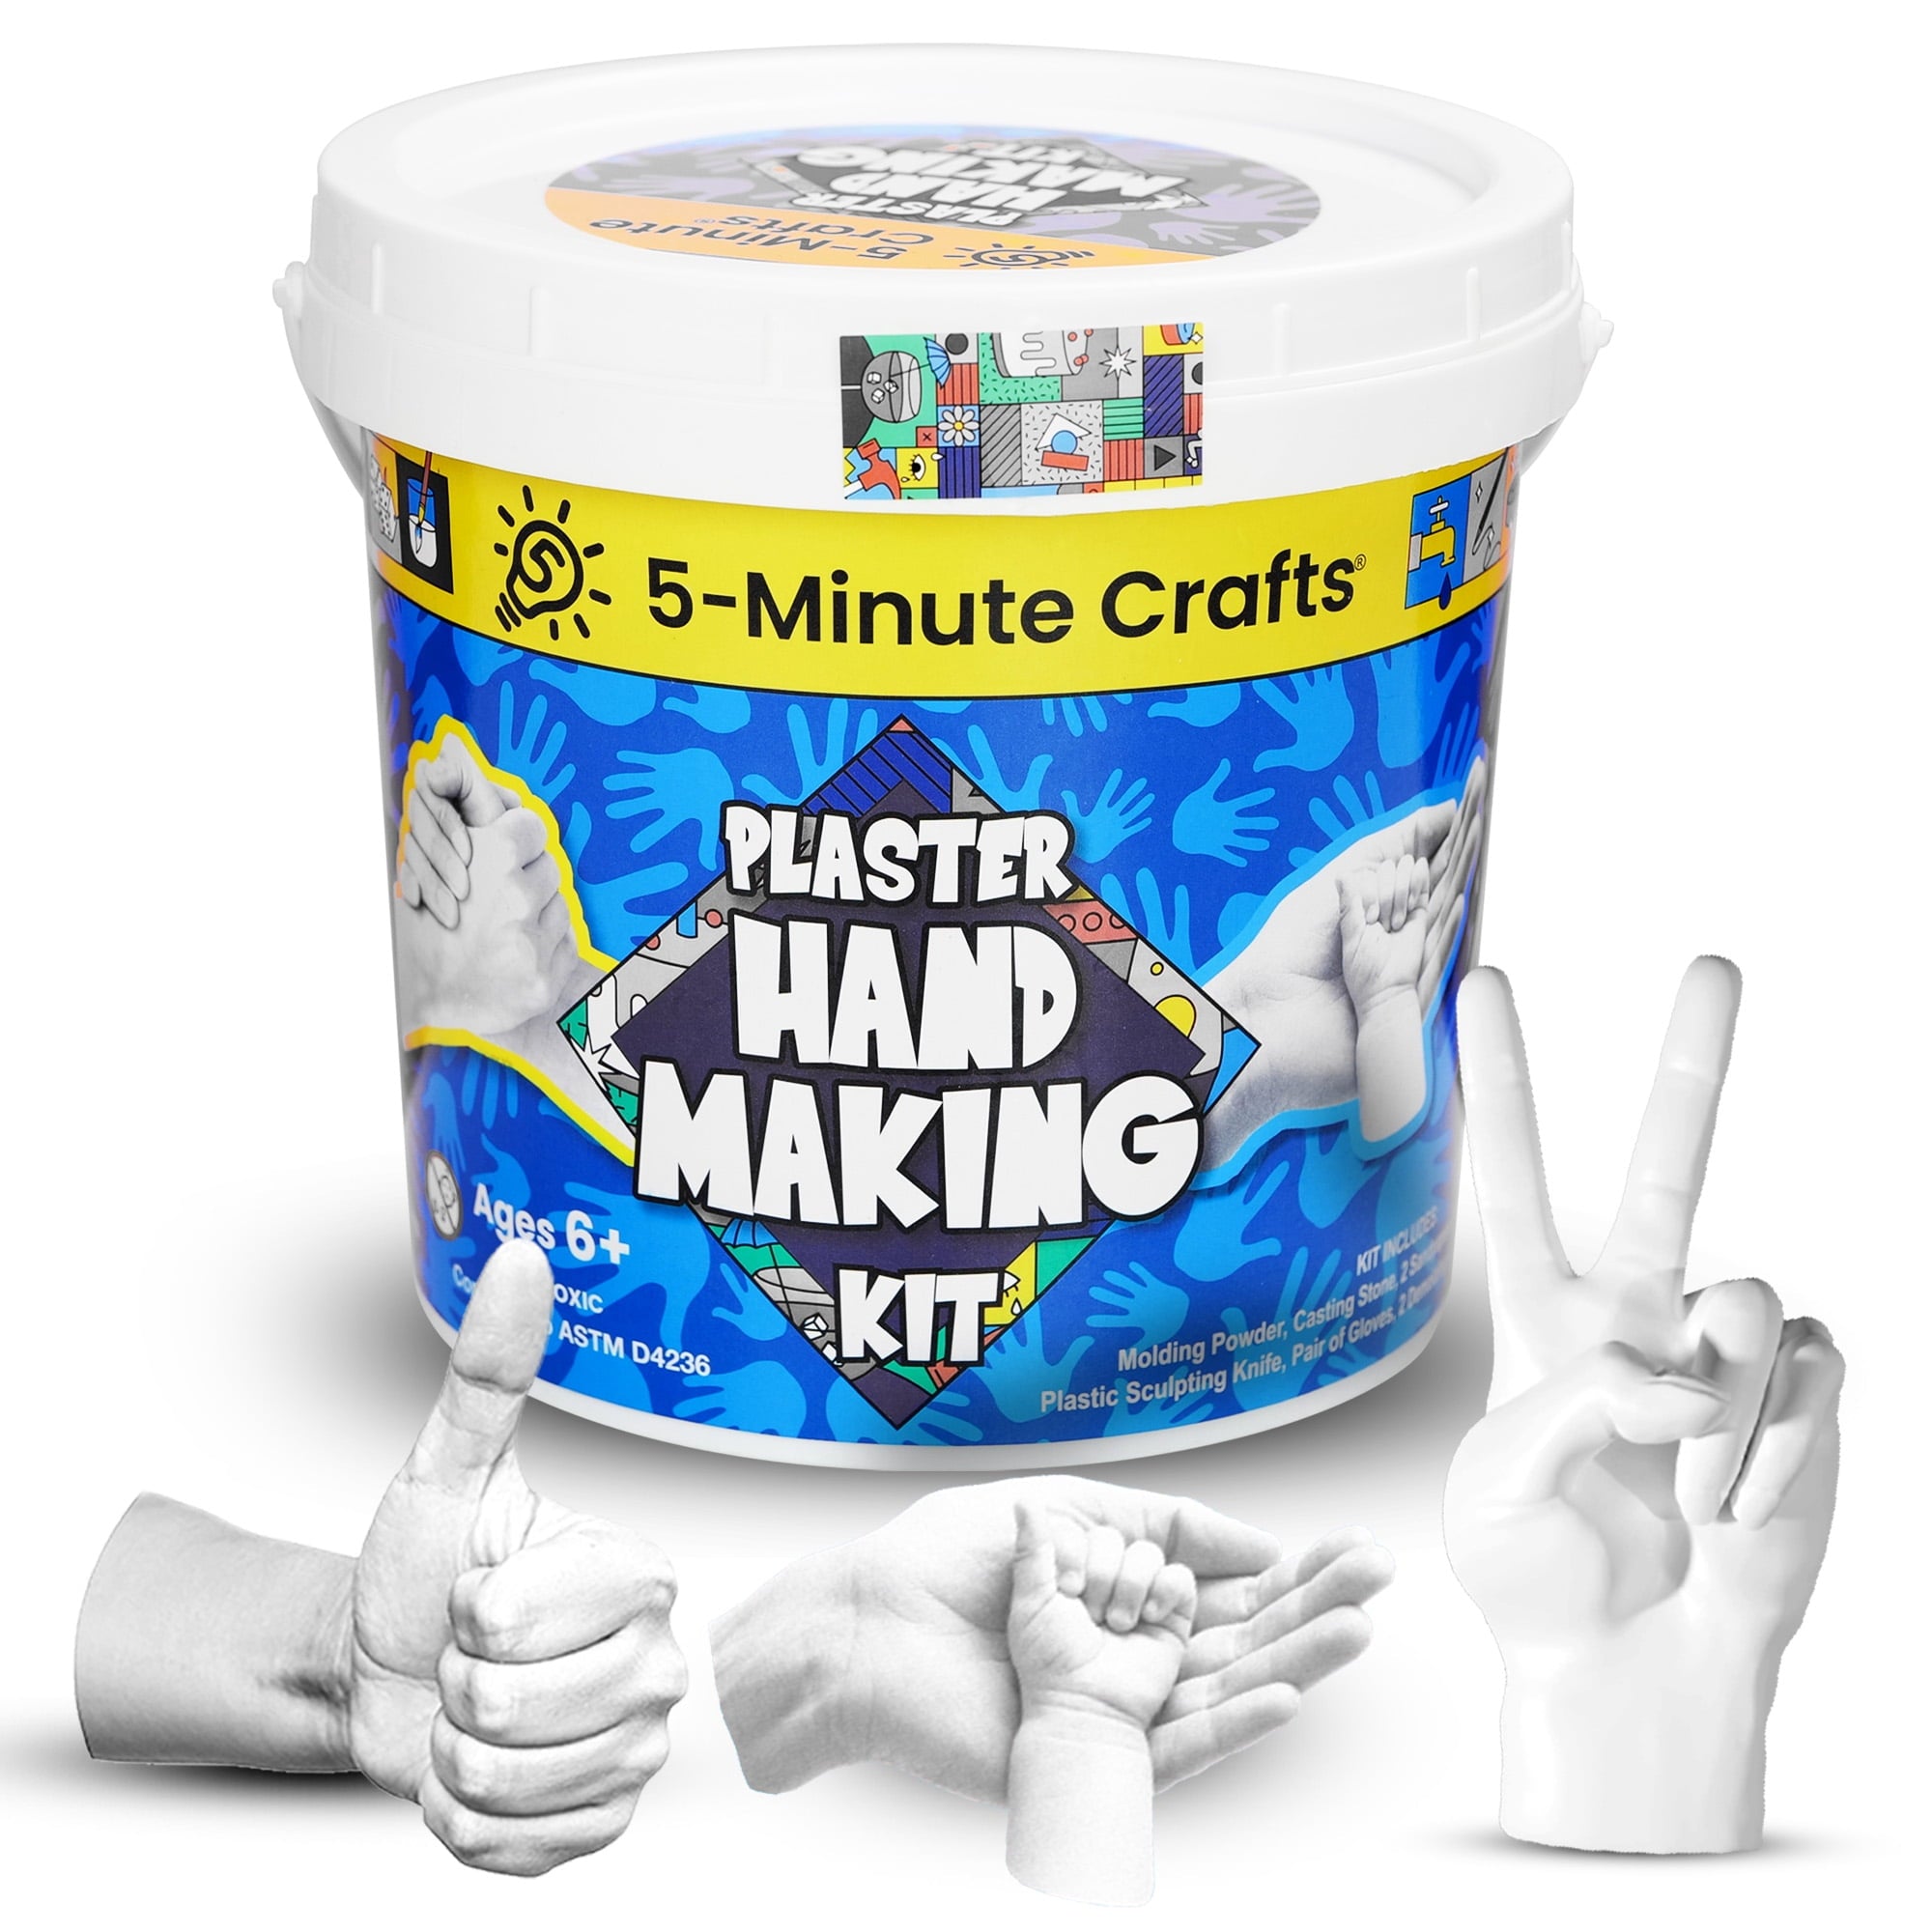 5 Minute Crafts Hand Plaster Making Kit for Kids Ages 6 As Seen on Social Media efb47d90 1b95 4e18 8d23 6b65ba8293a7.1ee5095aa27591afbc7e70f39364c797